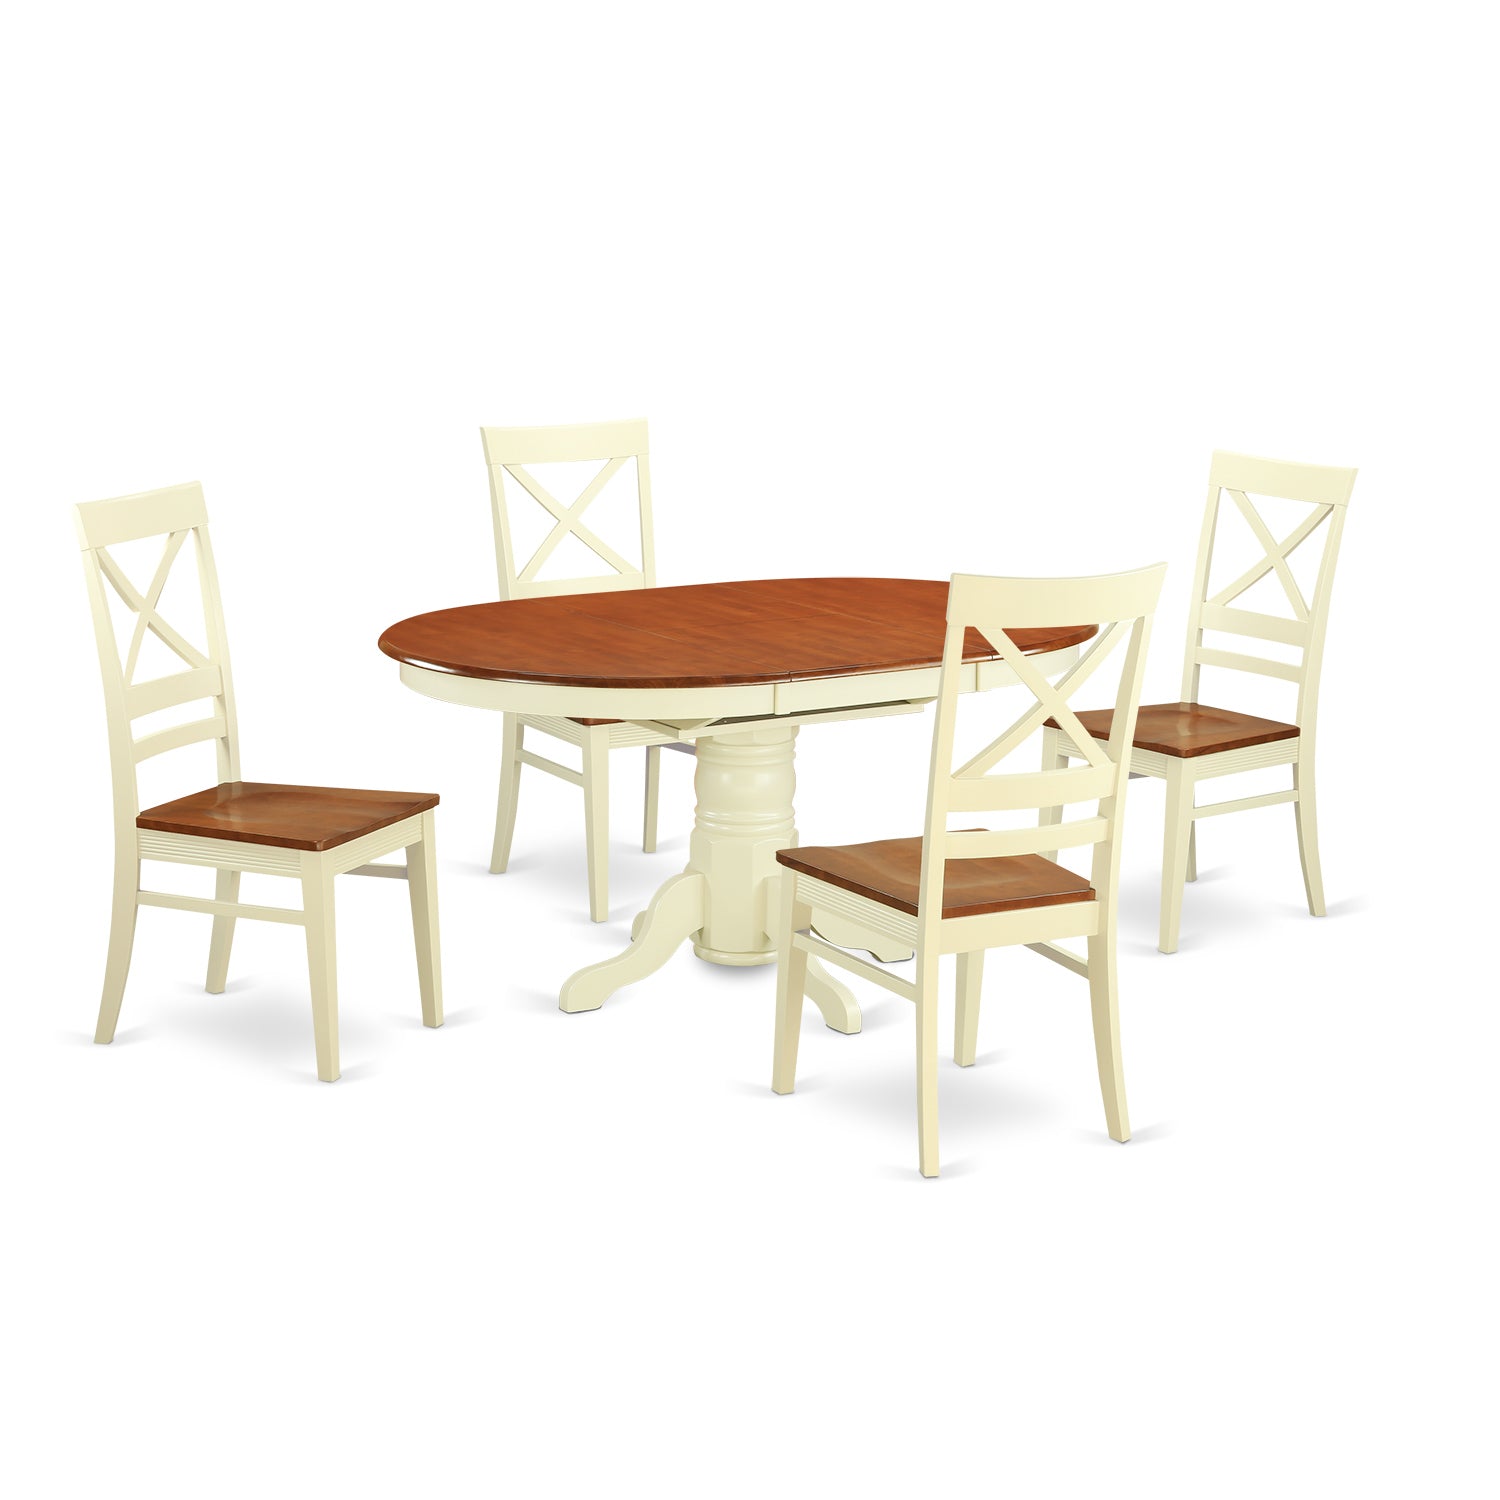 AVQU5-WHI-W 5 PC Table and chair set - Dining Table and 4 Kitchen Dining Chairs